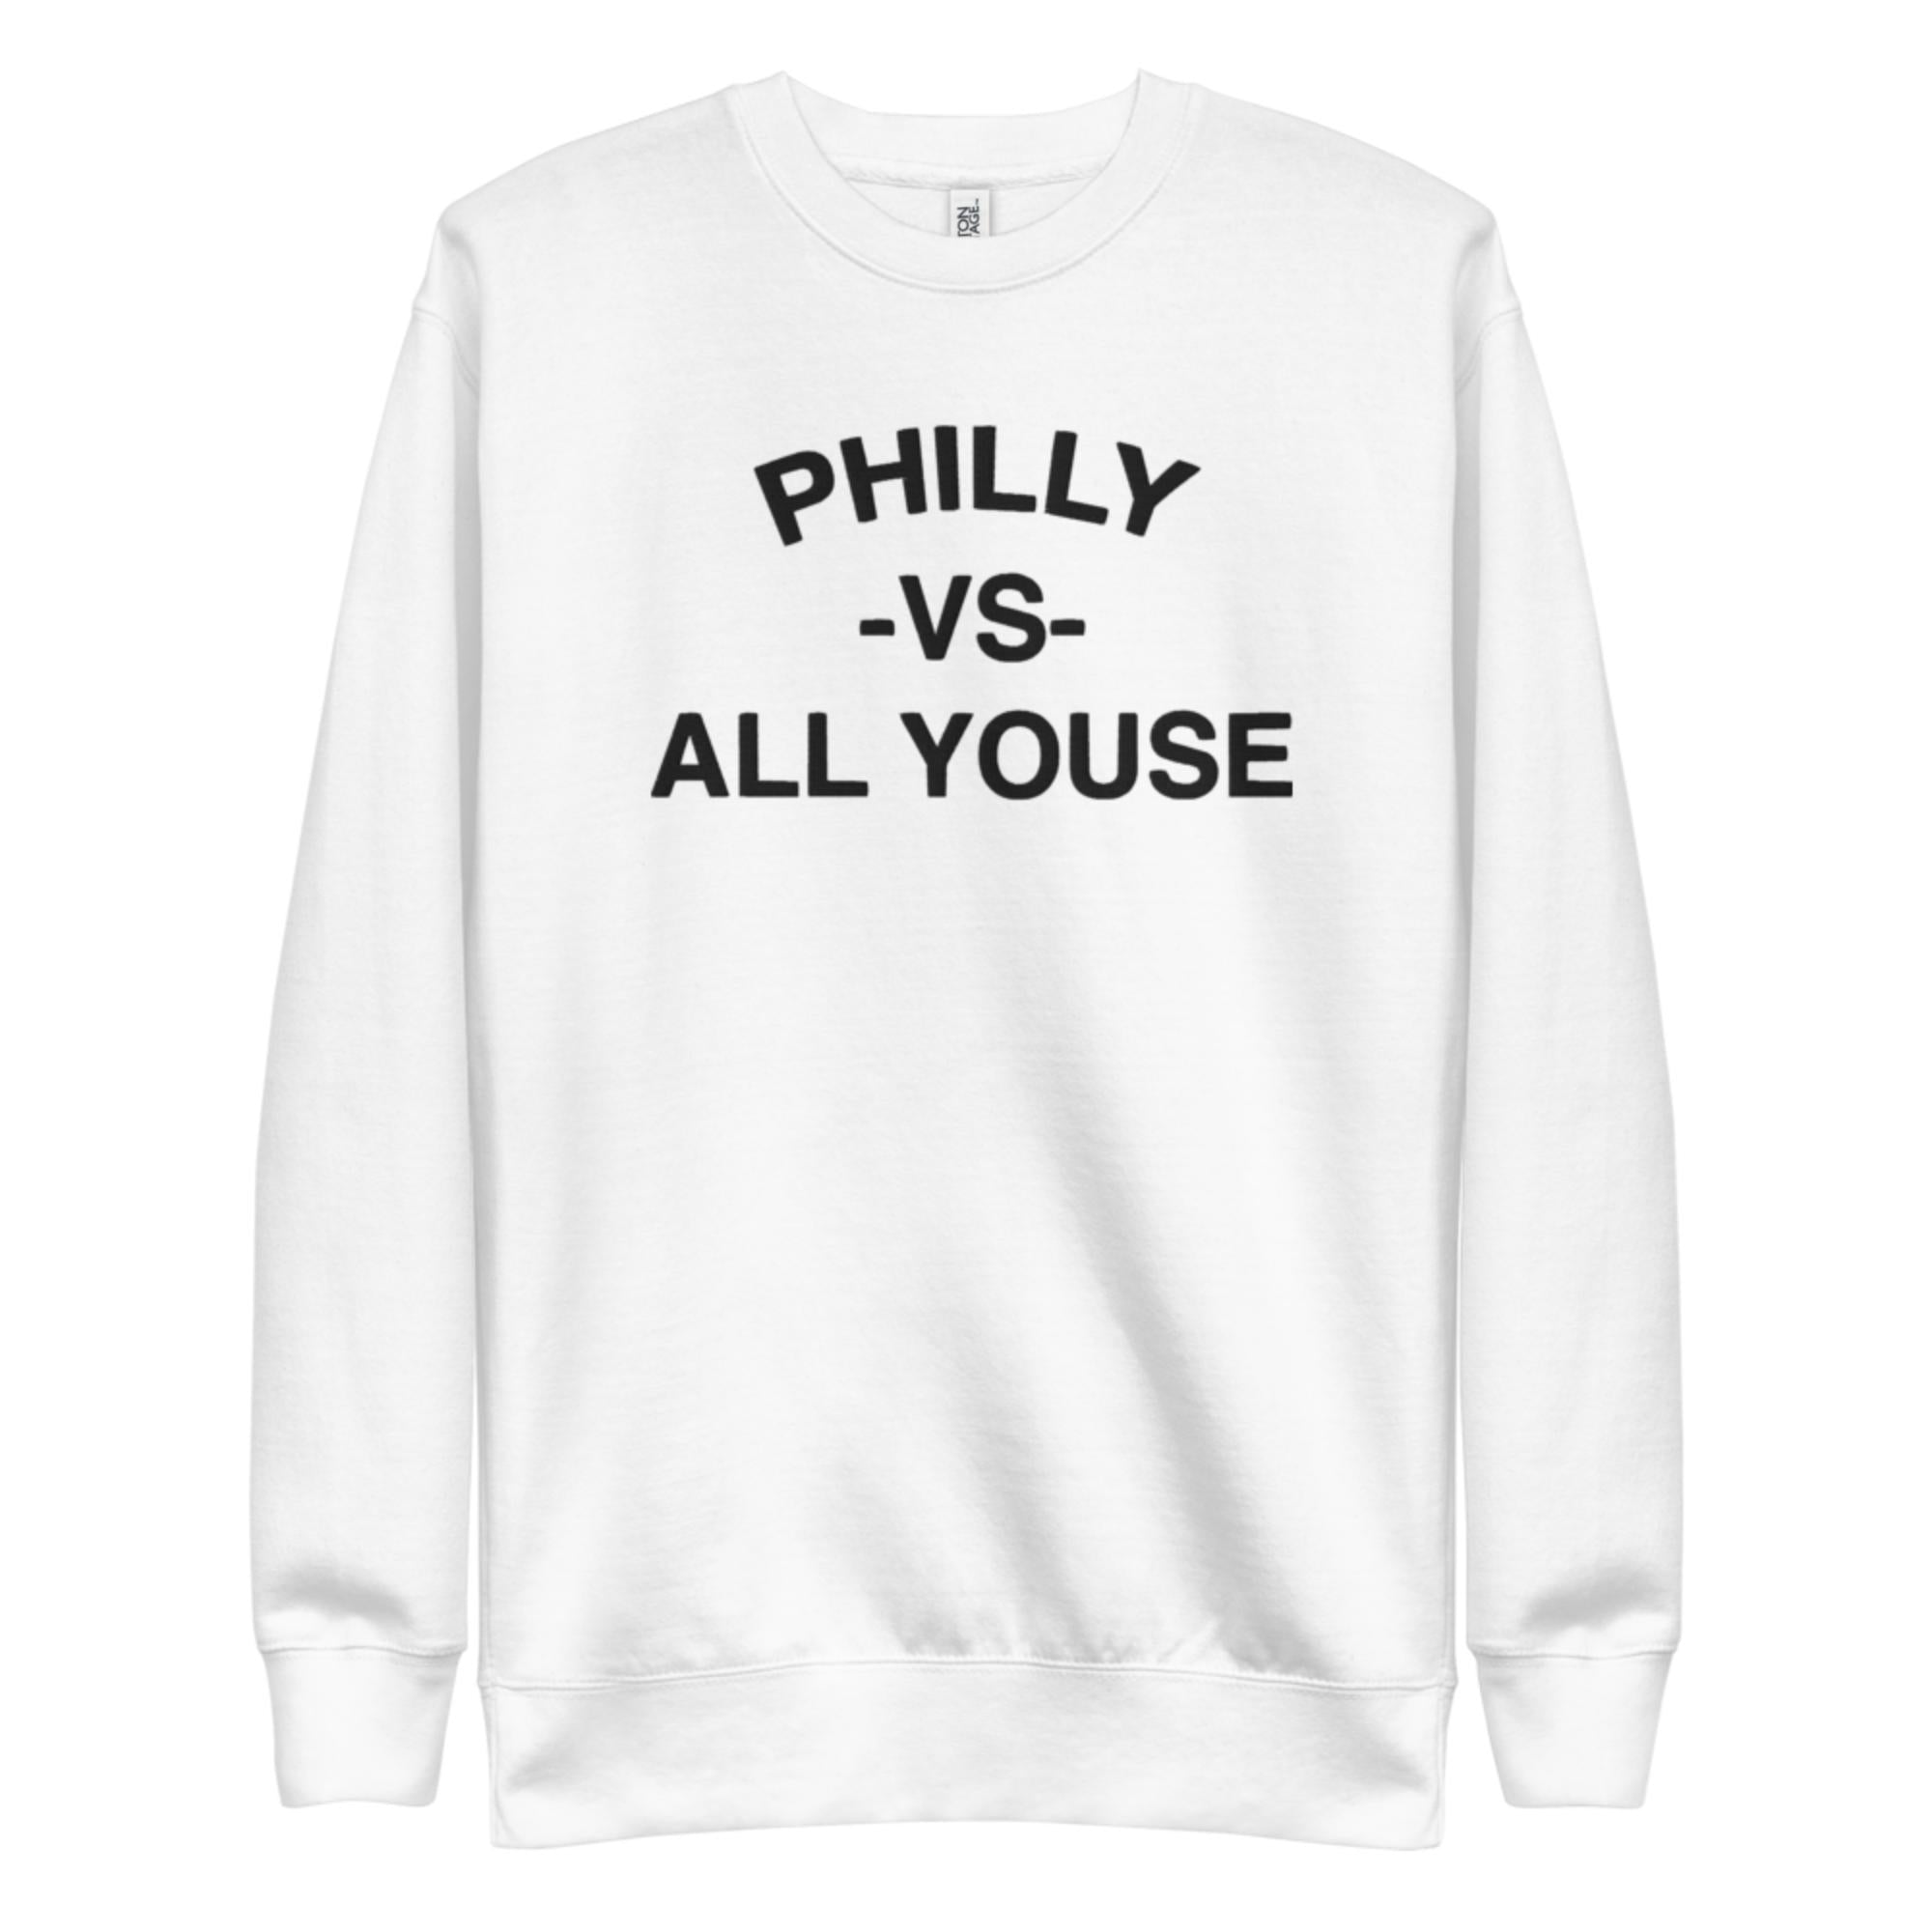 "Philly vs. All Youse" Embroidered Sweatshirt